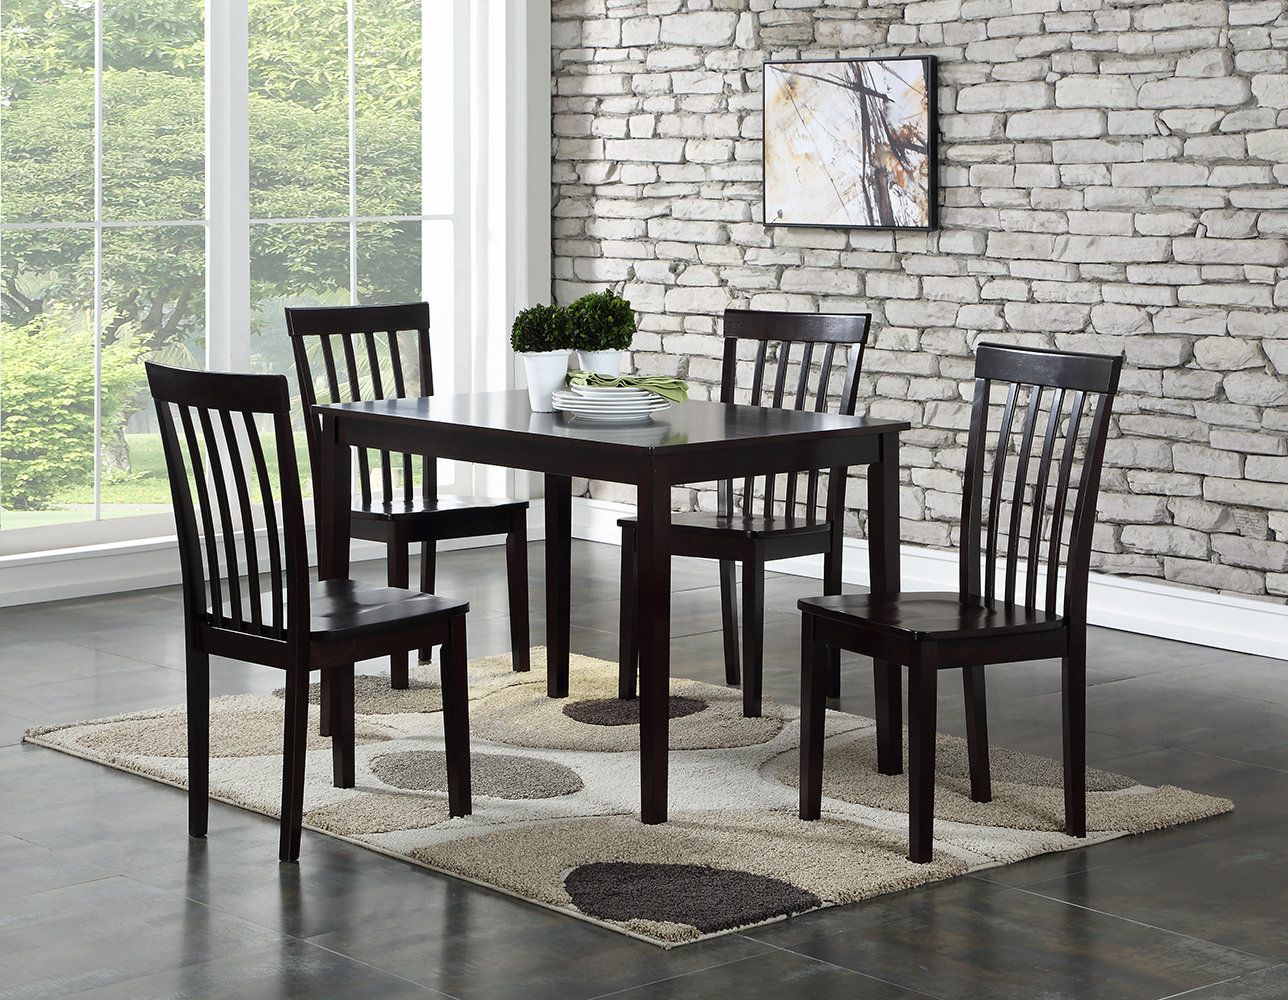 Ralls 5 Piece Dining Set Regarding Best And Newest Bearden 3 Piece Dining Sets (View 15 of 20)